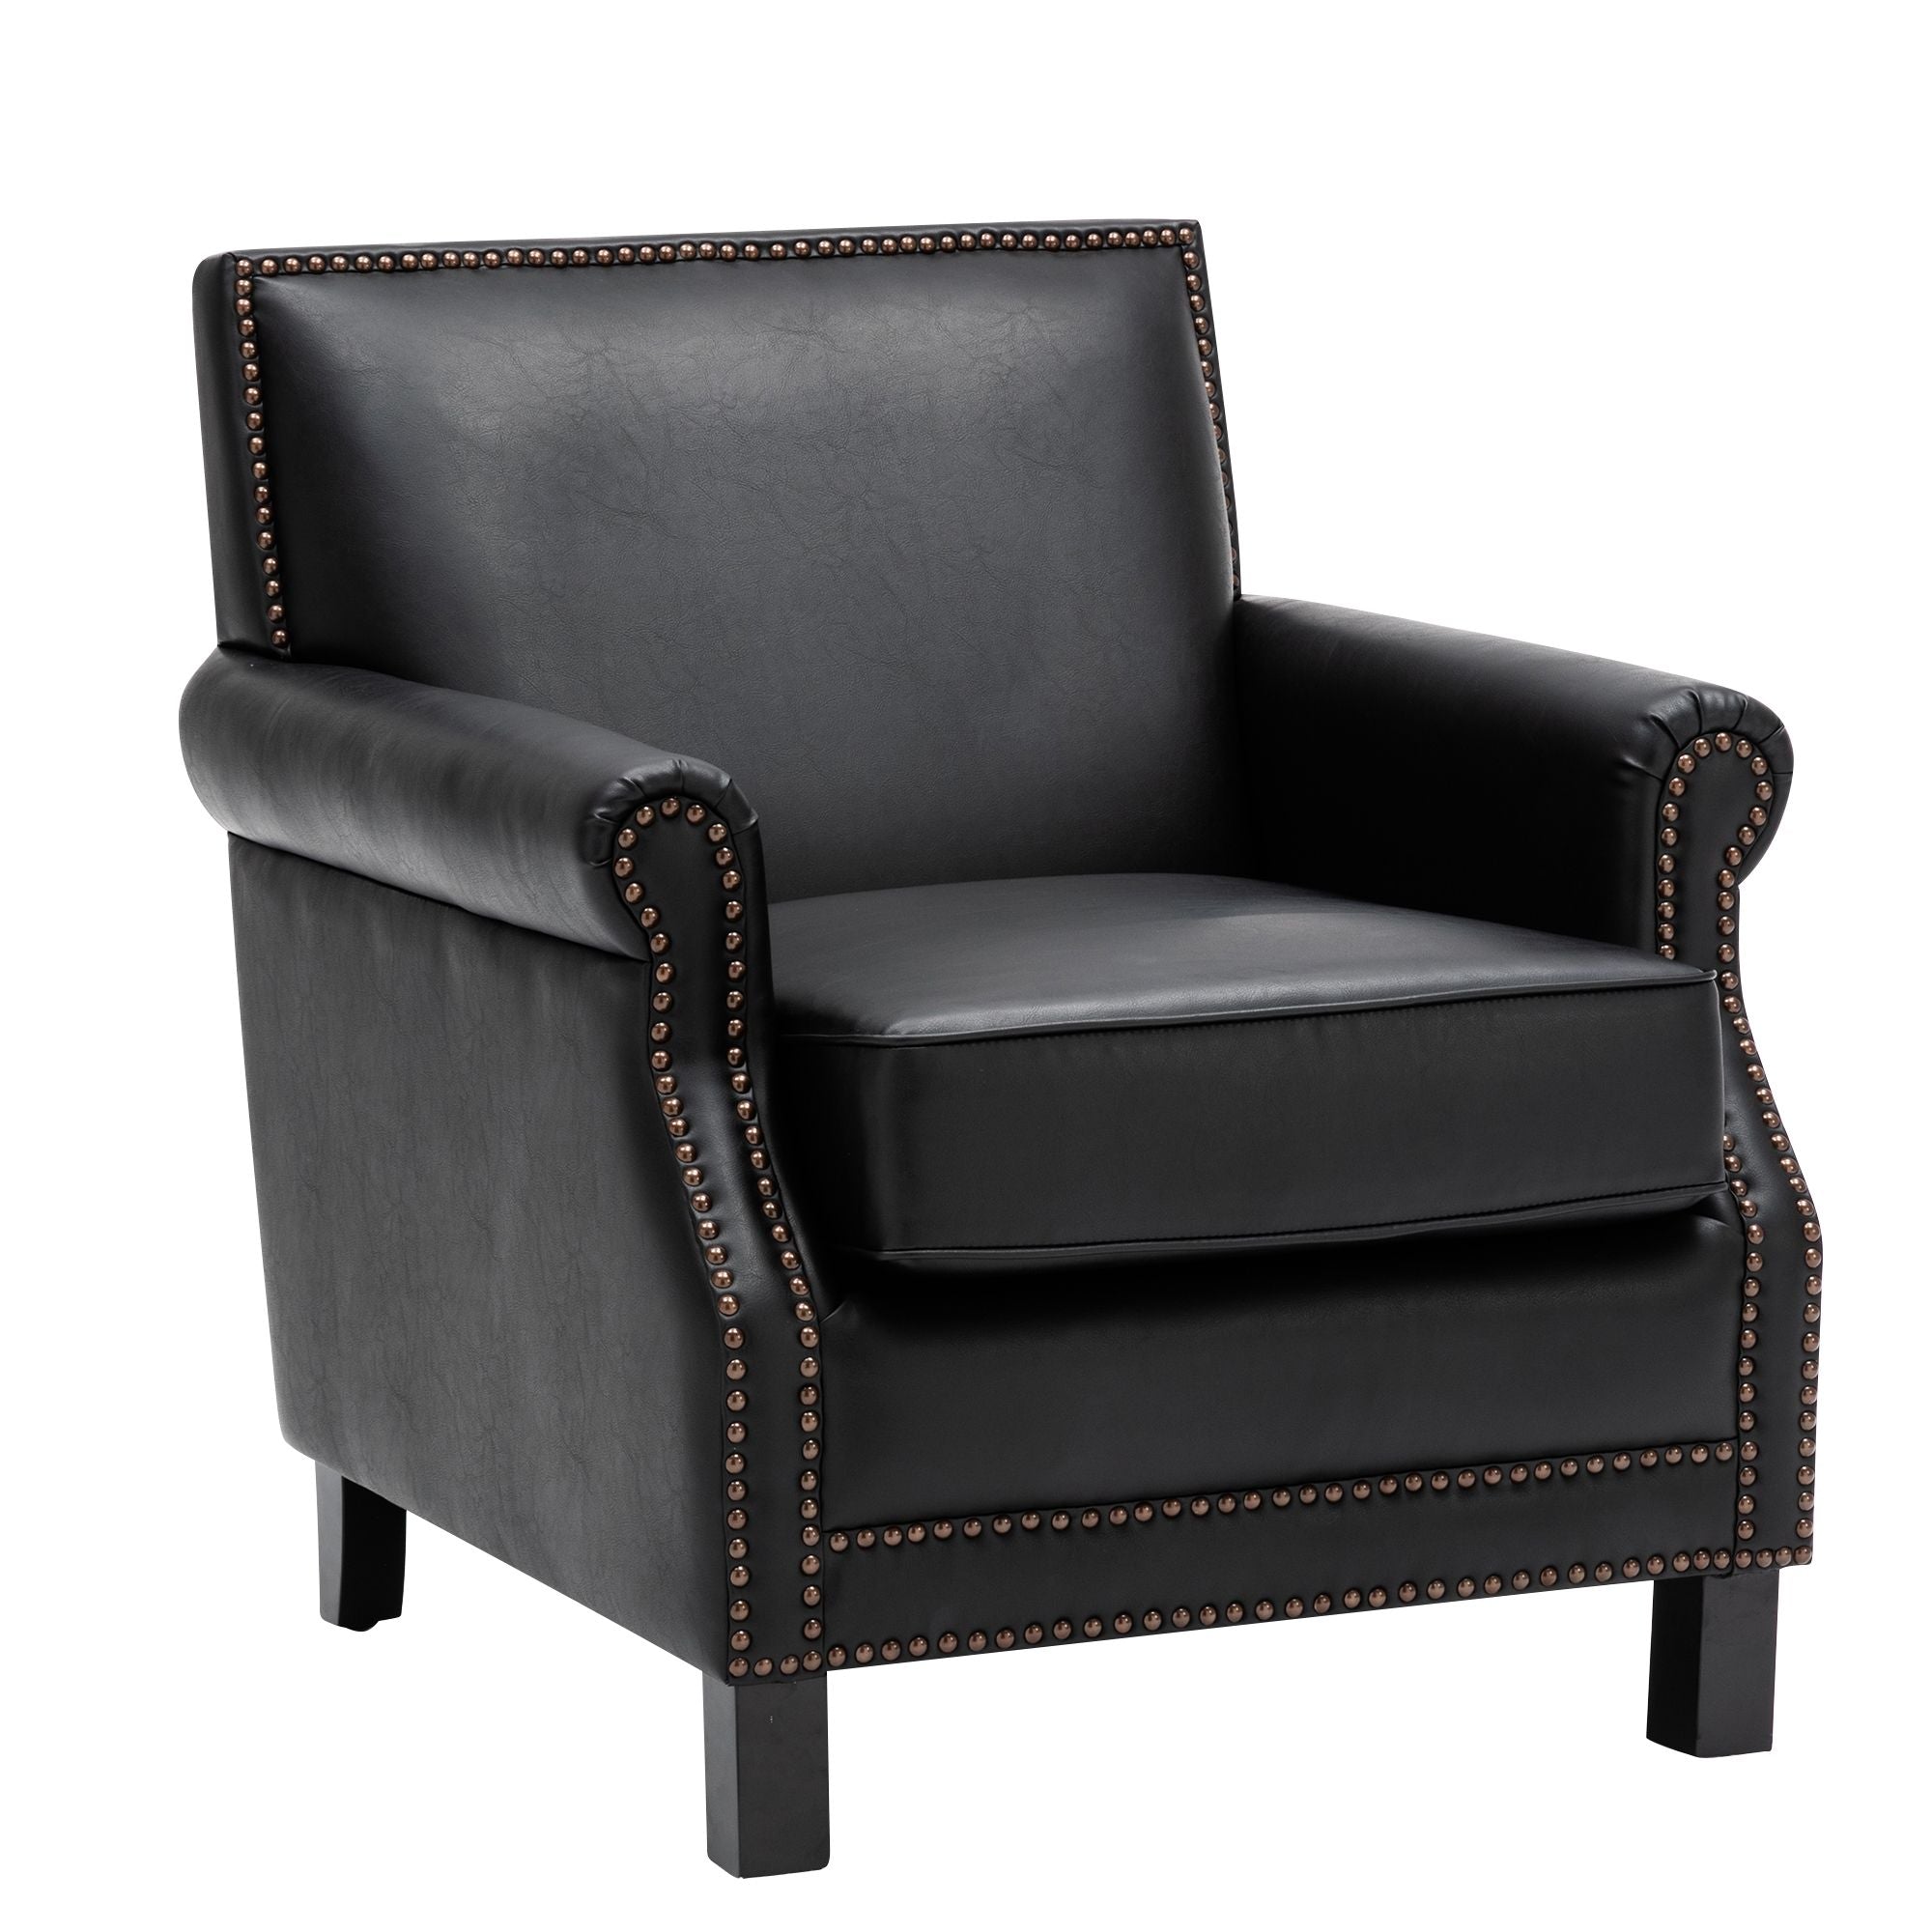 Living Traditional Upholstered PU Leather Club Chair with Nailhead Trim, Black